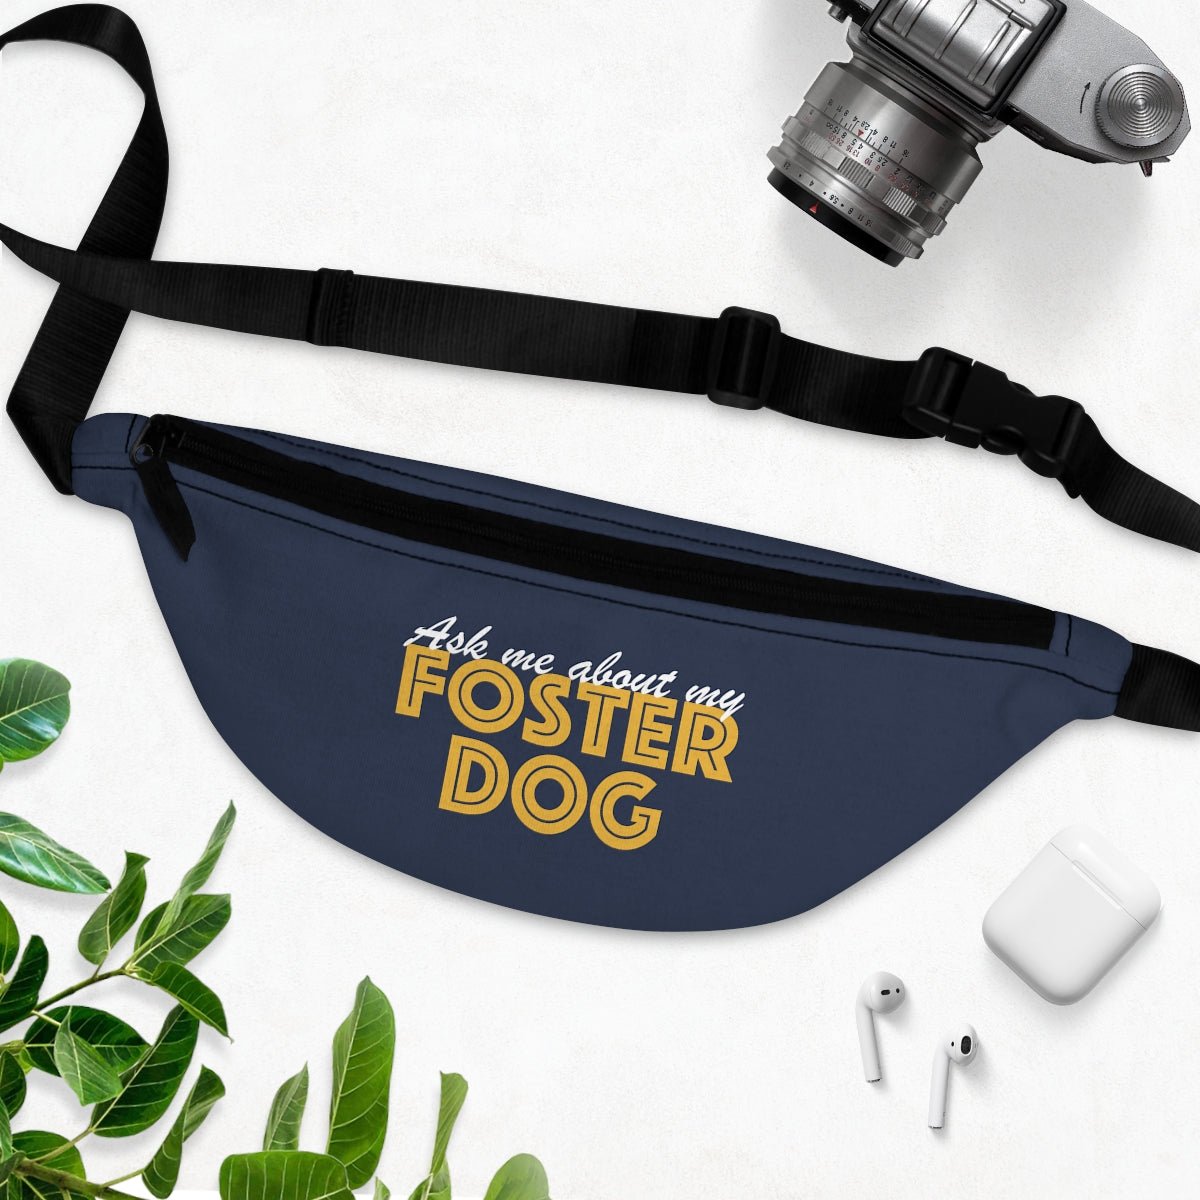 Ask Me About My Foster Dog | Fanny Pack - Detezi Designs-32541588694113549131